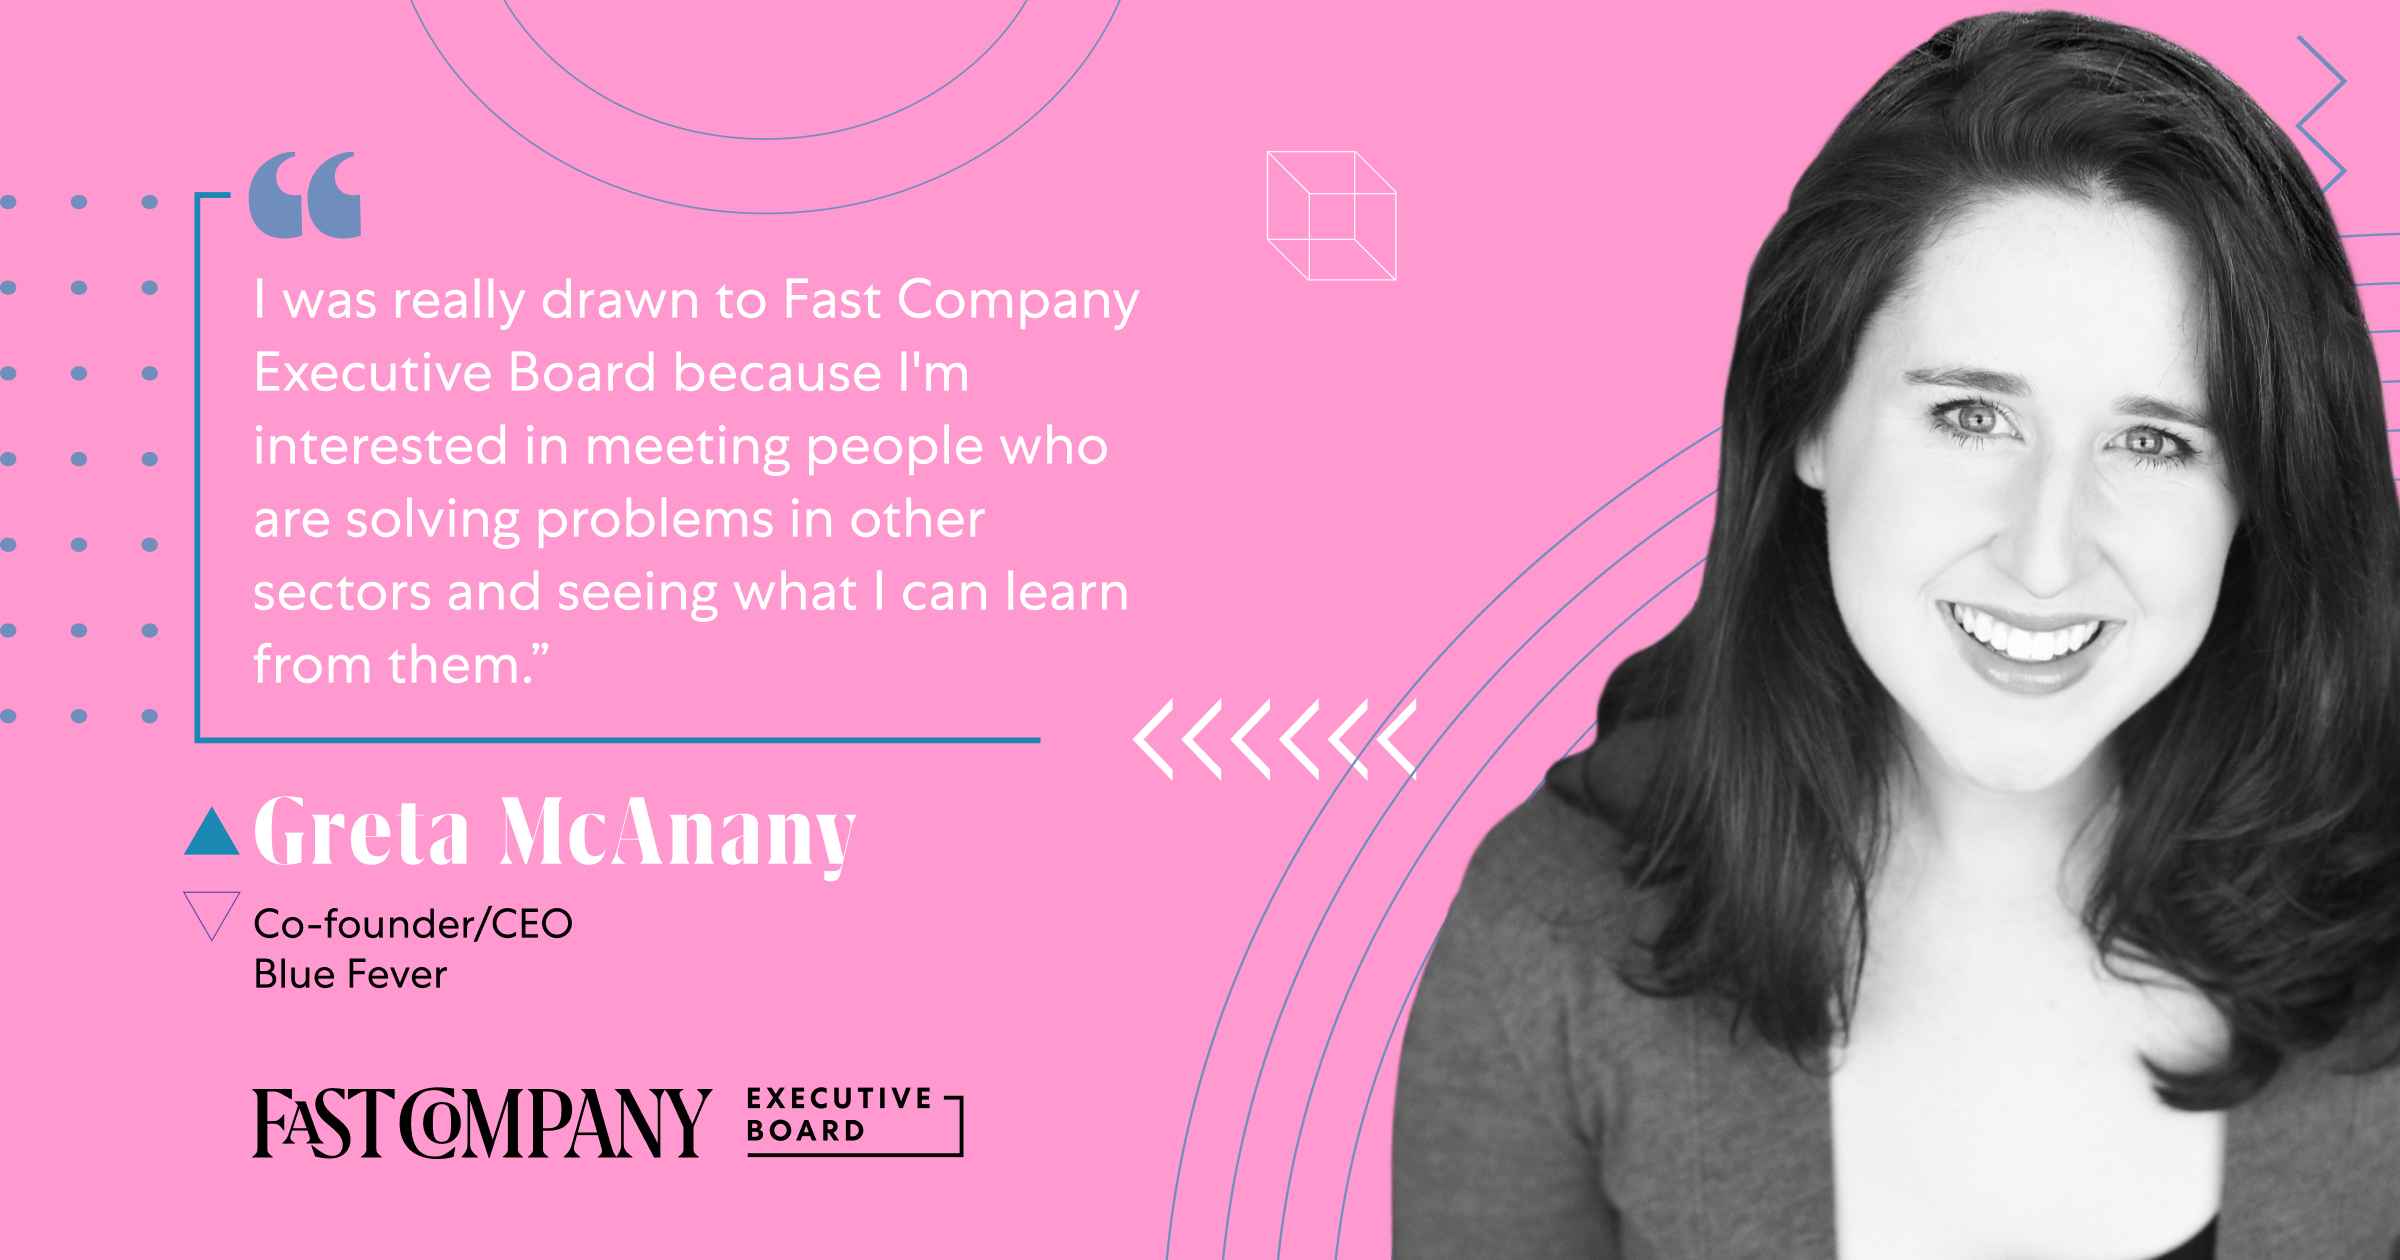 Fast Company Executive Board Offers Greta McAnany Connections to Other Leaders Who Are Imagining the Future